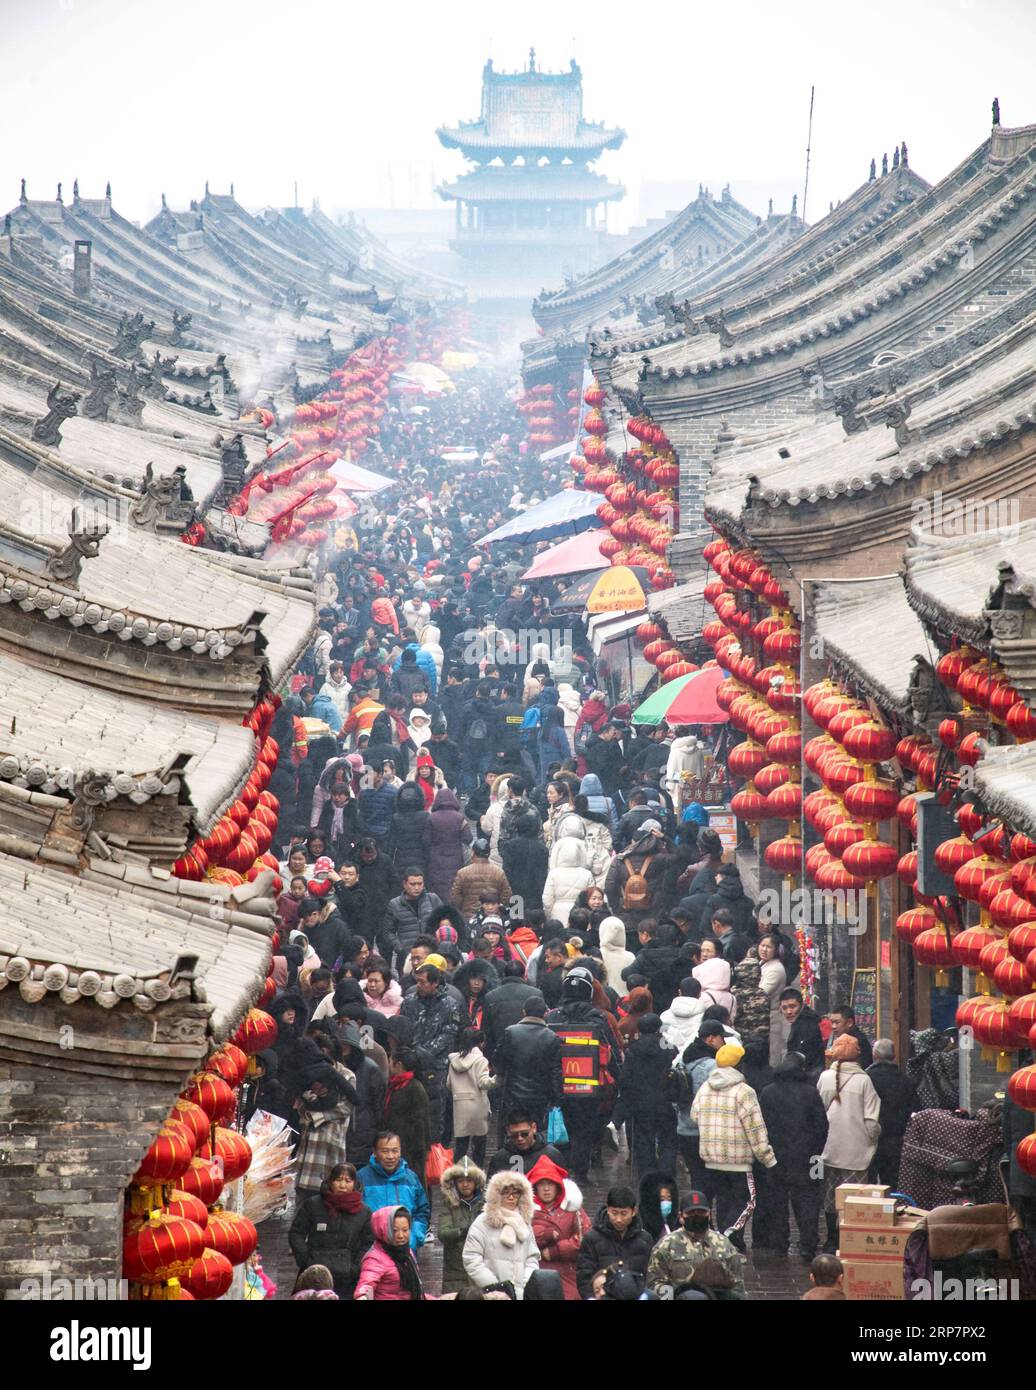 190210 -- JINZHONG, Feb. 10, 2019 -- Tourists visit Pingyao, a tourist attraction in north China s Shanxi Province, Feb. 10, 2019. China s domestic tourism revenue gained 513.9 billion yuan about 76.21 billion U.S. dollars during the week-long Spring Festival holiday that ends Sunday, an annual increase of 8.2 percent, according to the Ministry of Culture and Tourism. A total of 415 million trips were made across the country during the holiday, rising by 7.6 percent year on year, according to the ministry. Traditional culture was one of the travelers favorites during the holiday, as a survey b Stock Photo